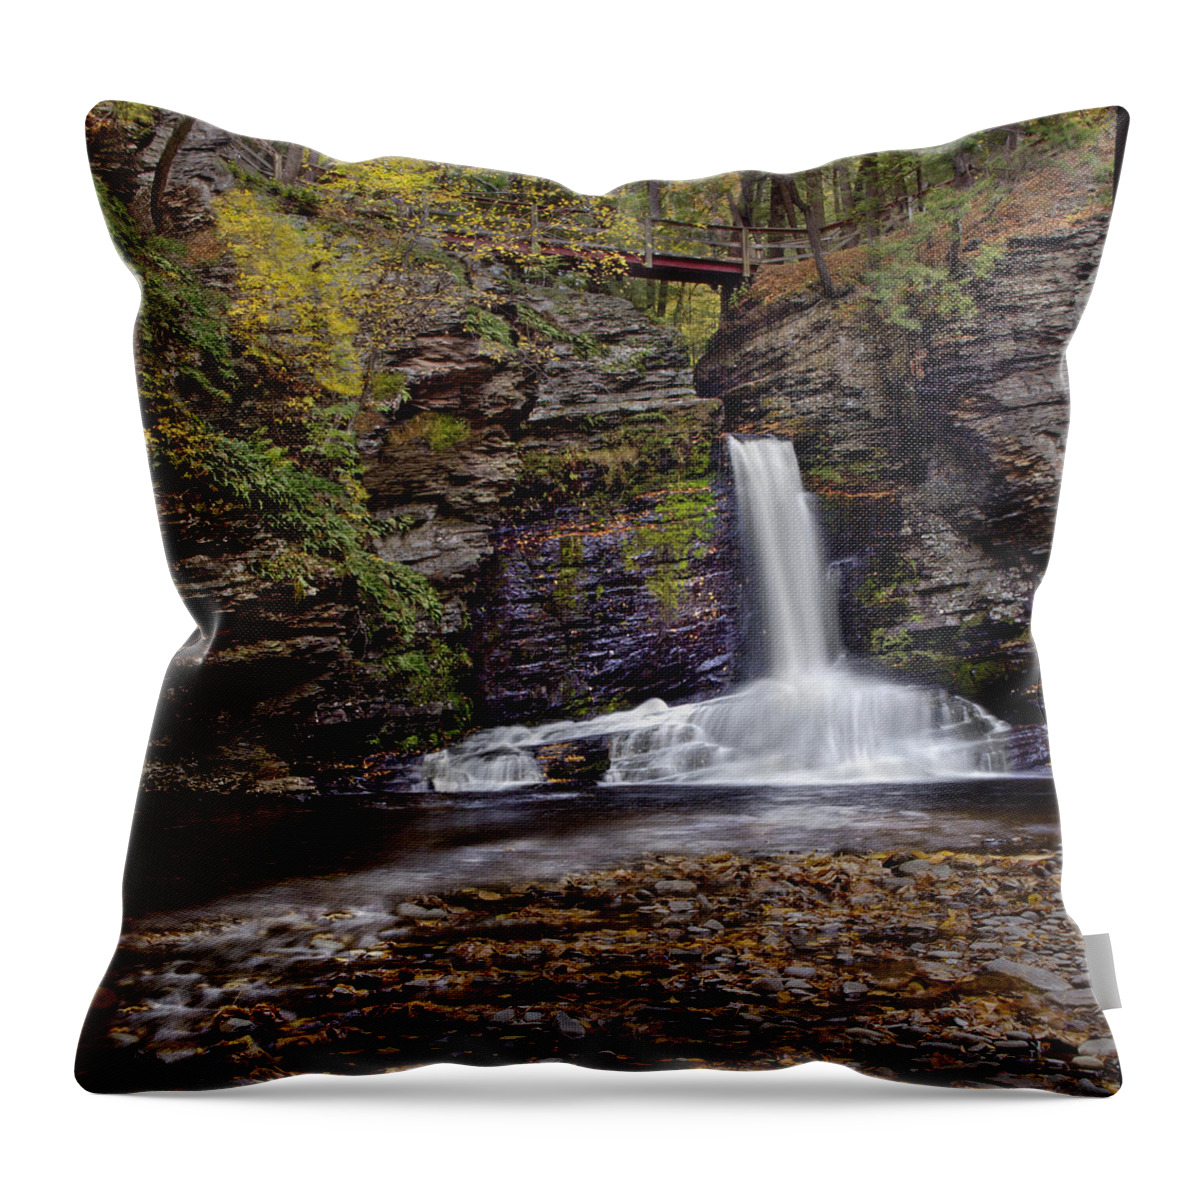 Water Fall Throw Pillow featuring the photograph Deer Leap Falls by Susan Candelario